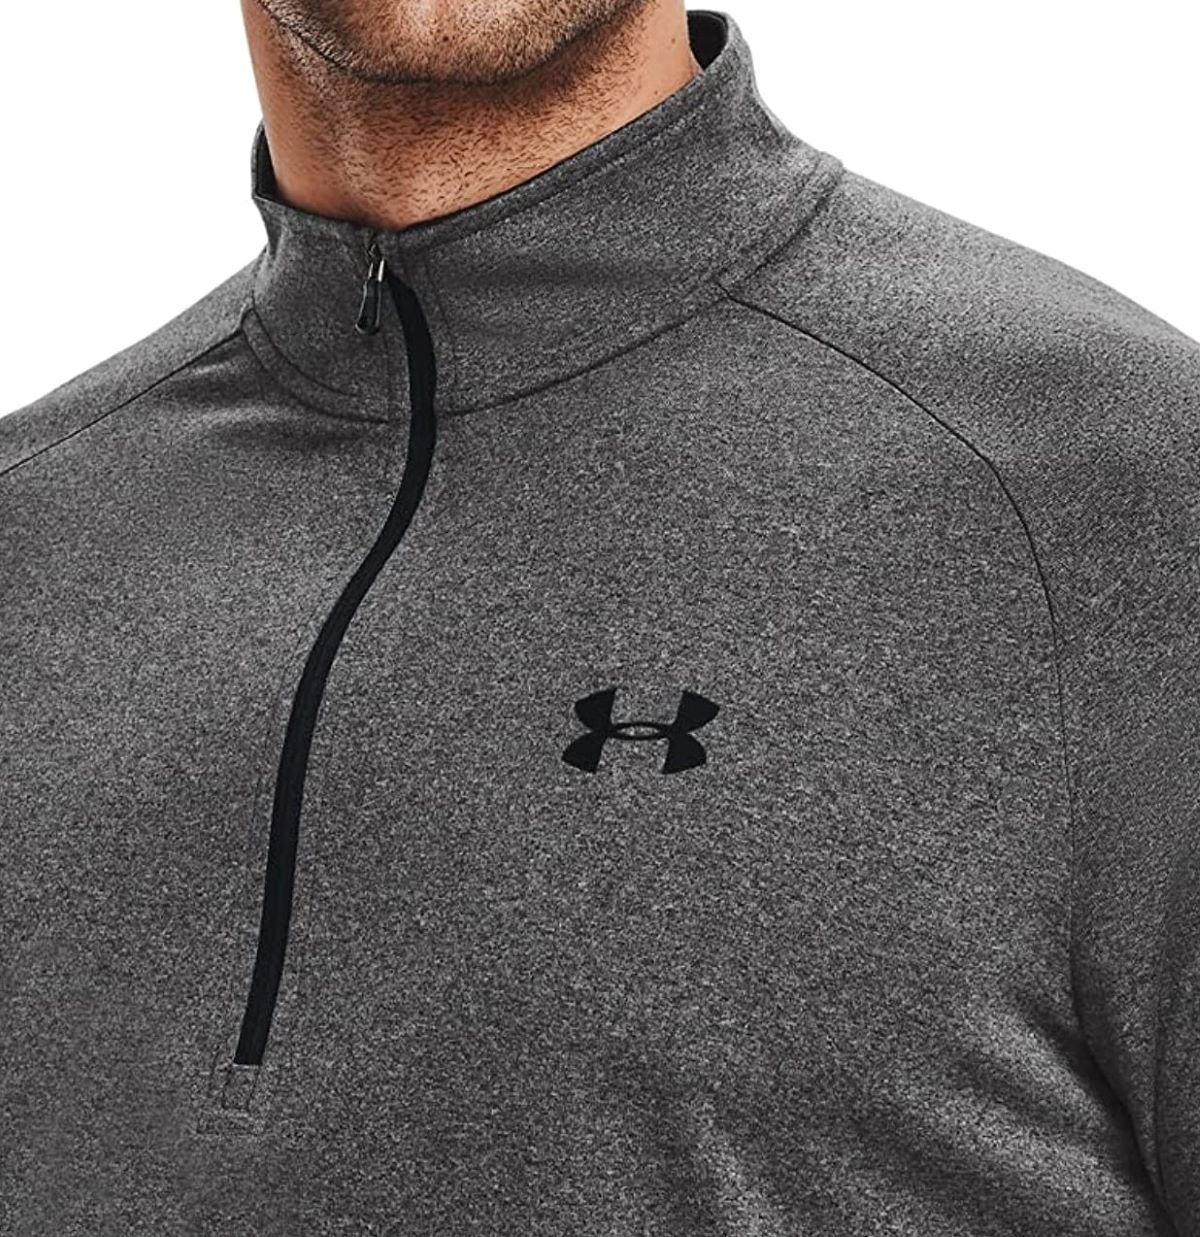 Under Armour Men’s 1/2 Zip Shirt Only $14.98 on Amazon | Sizes Up to 4XL